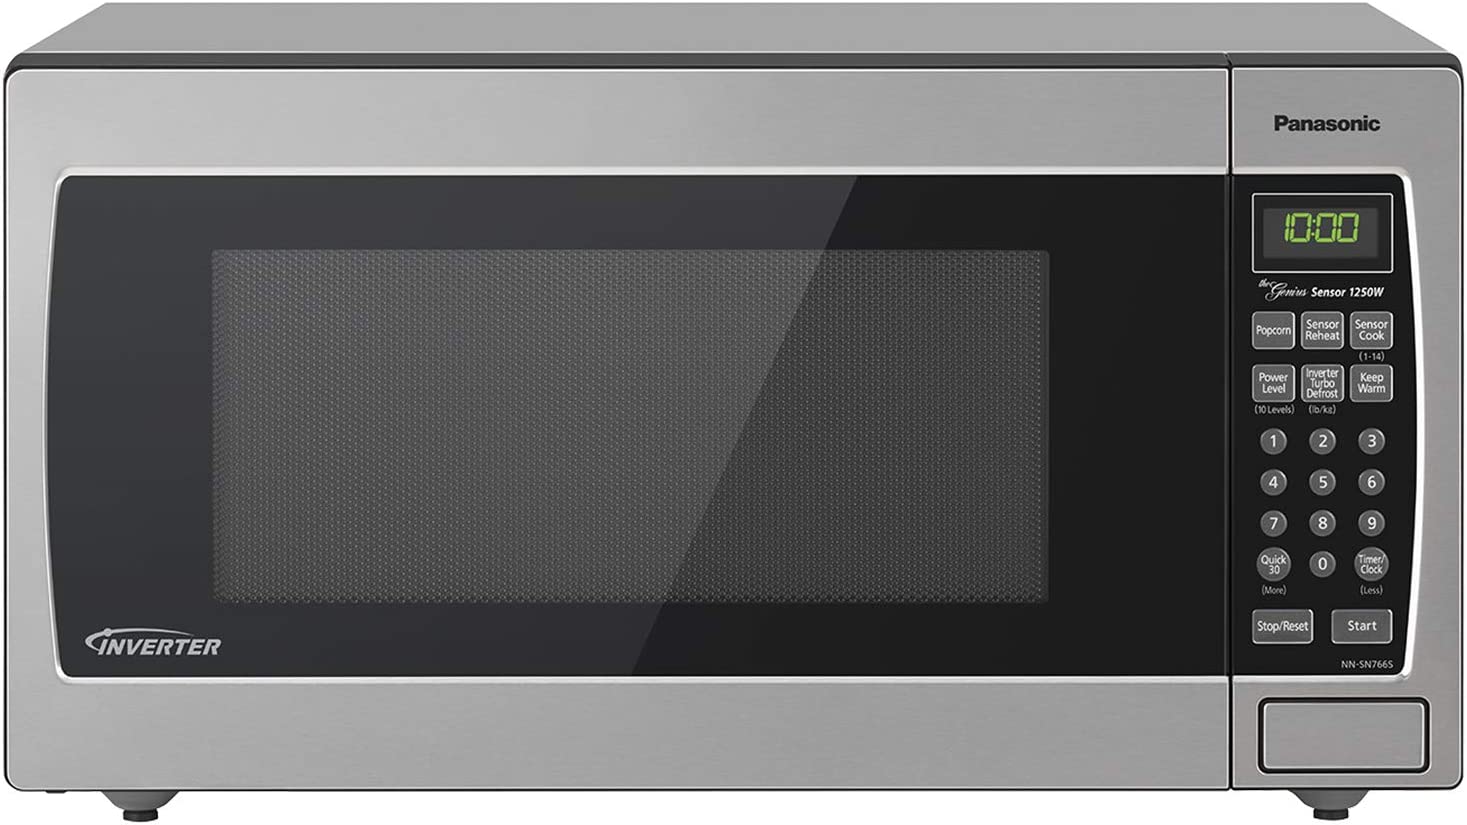 Panasonic Microwave Oven NN-SN766S Stainless Steel Countertop Built-In with Inverter Technology and Genius Senso